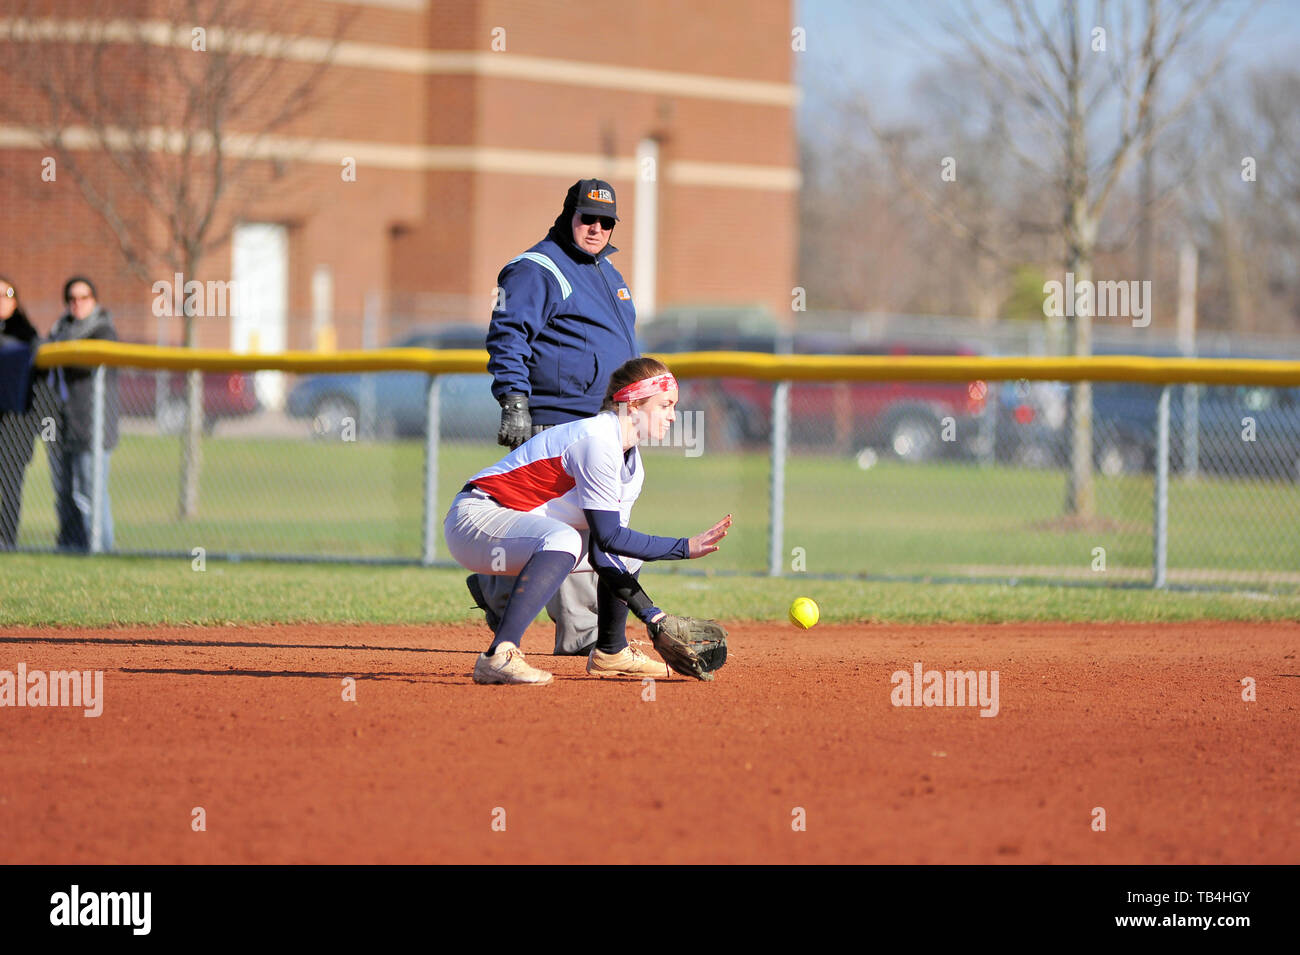 Second baseman fielding a ground ball prior to throwing on to first base to retire the batter. USA. Stock Photo